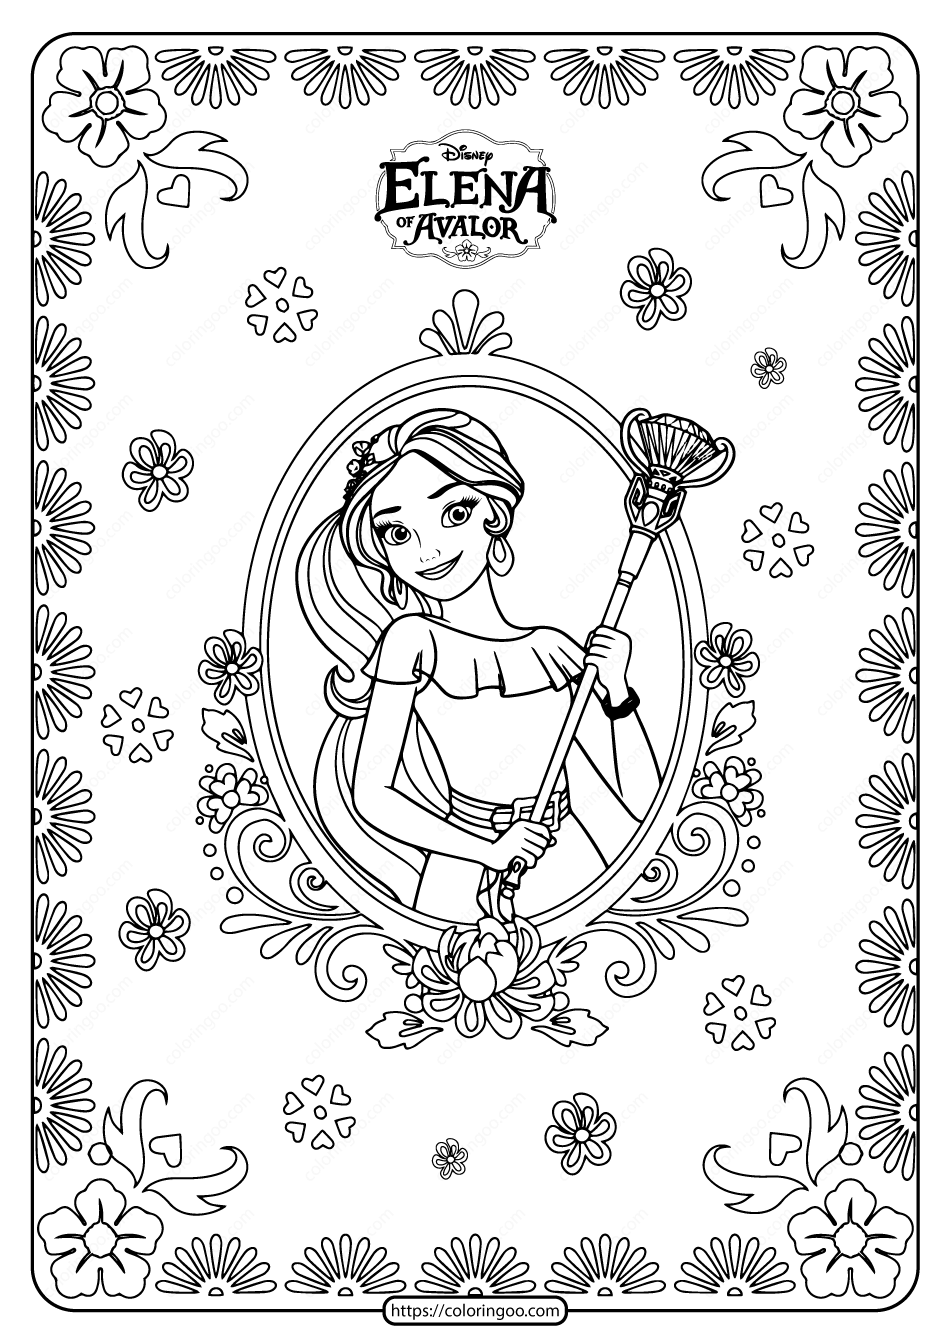 printable princess elena of avalor pdf coloring pages